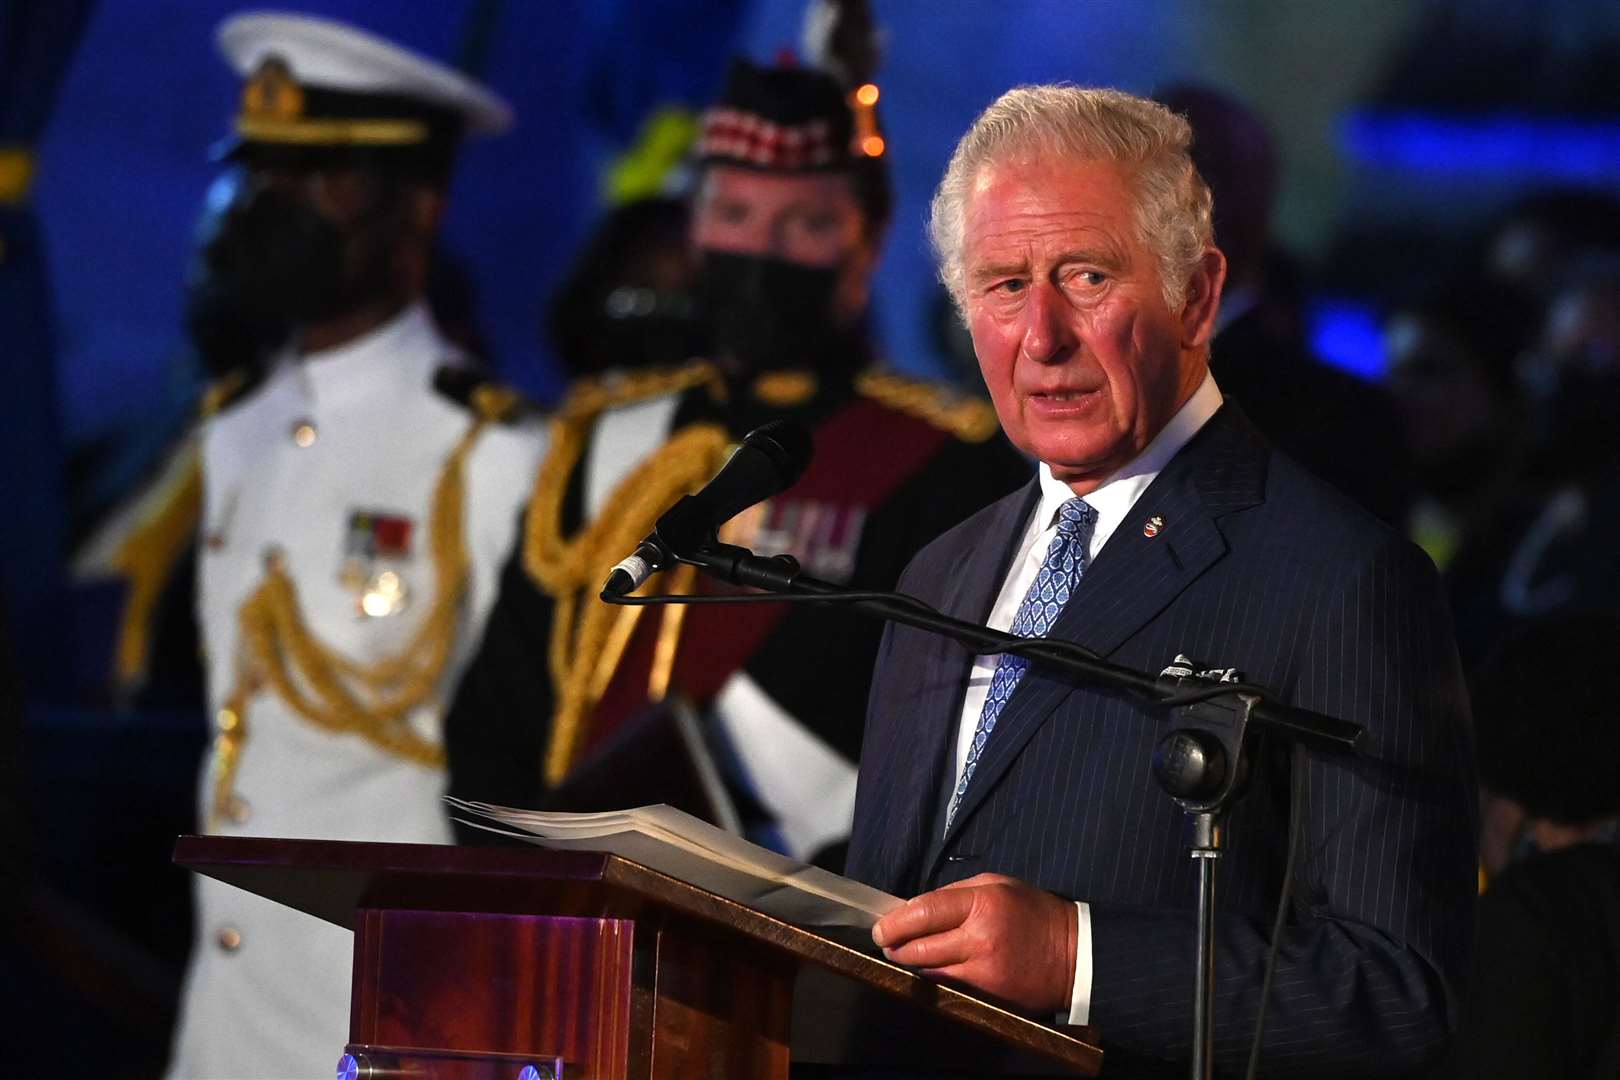 The Prince of Wales speaks at the Presidential Inauguration Ceremony at Heroes Square in Bridgetown (Jeff J Mitchell/PA)